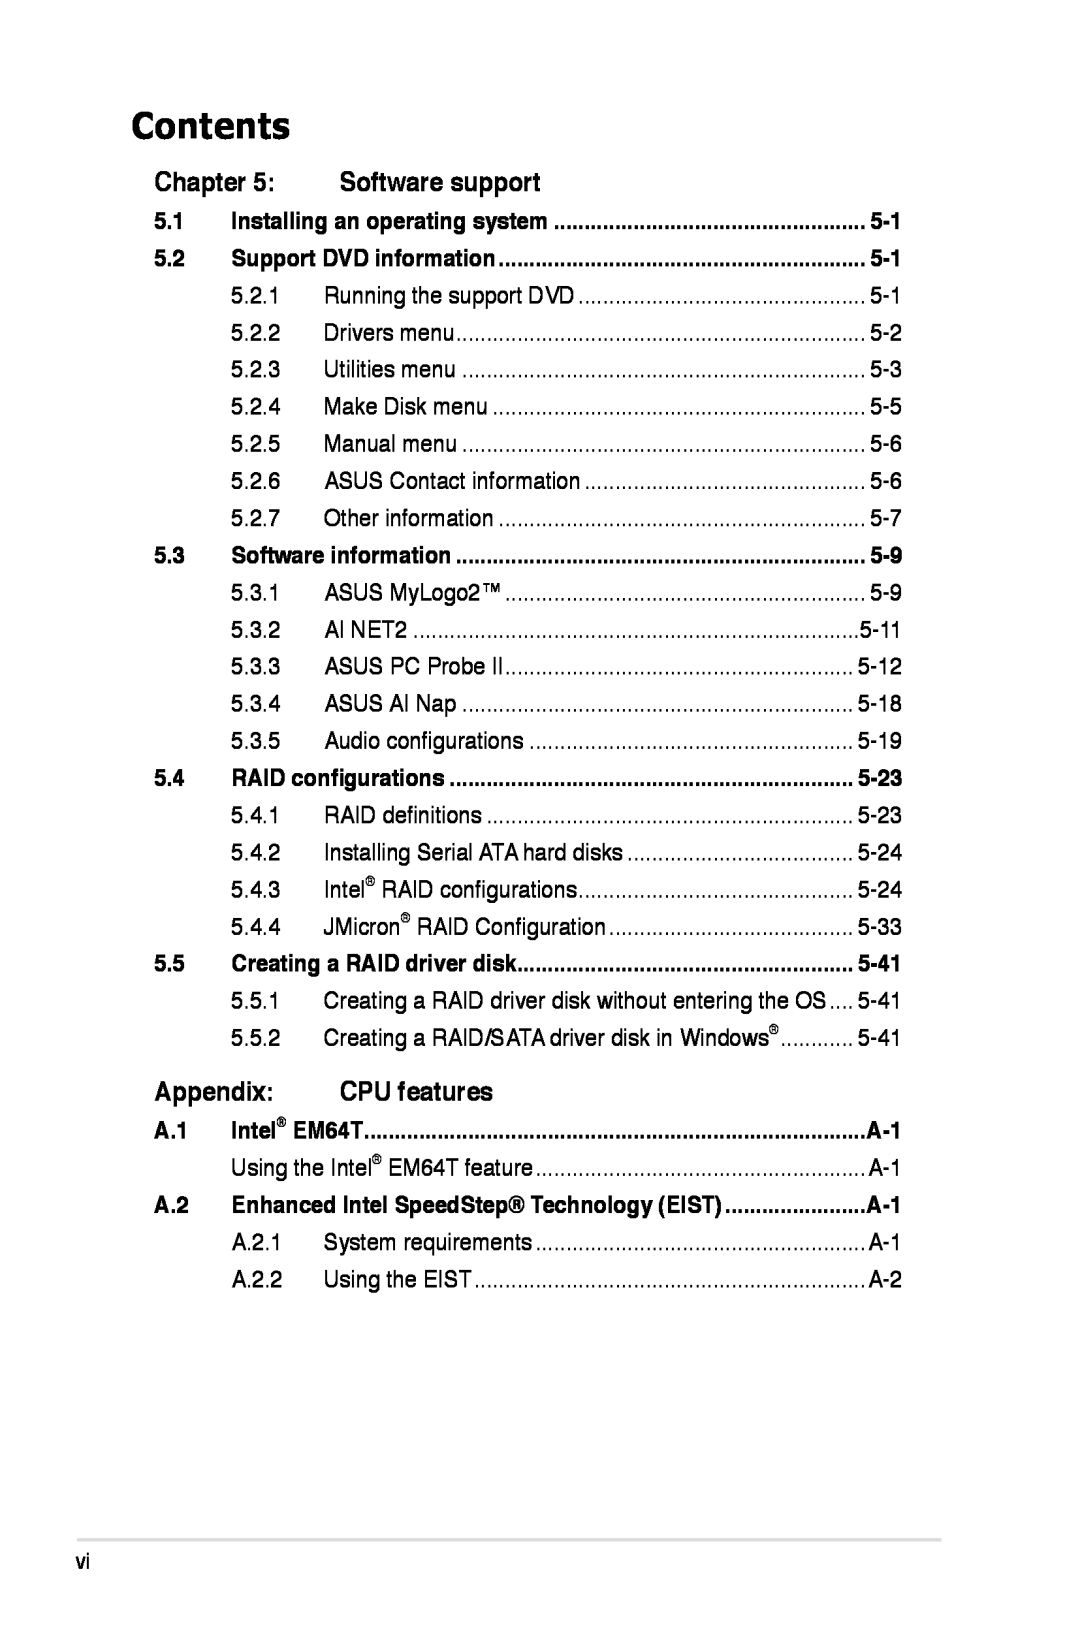 Asus Z7S WS manual Software support, Appendix, CPU features, A.2.1, A.2.2, Contents, Chapter 